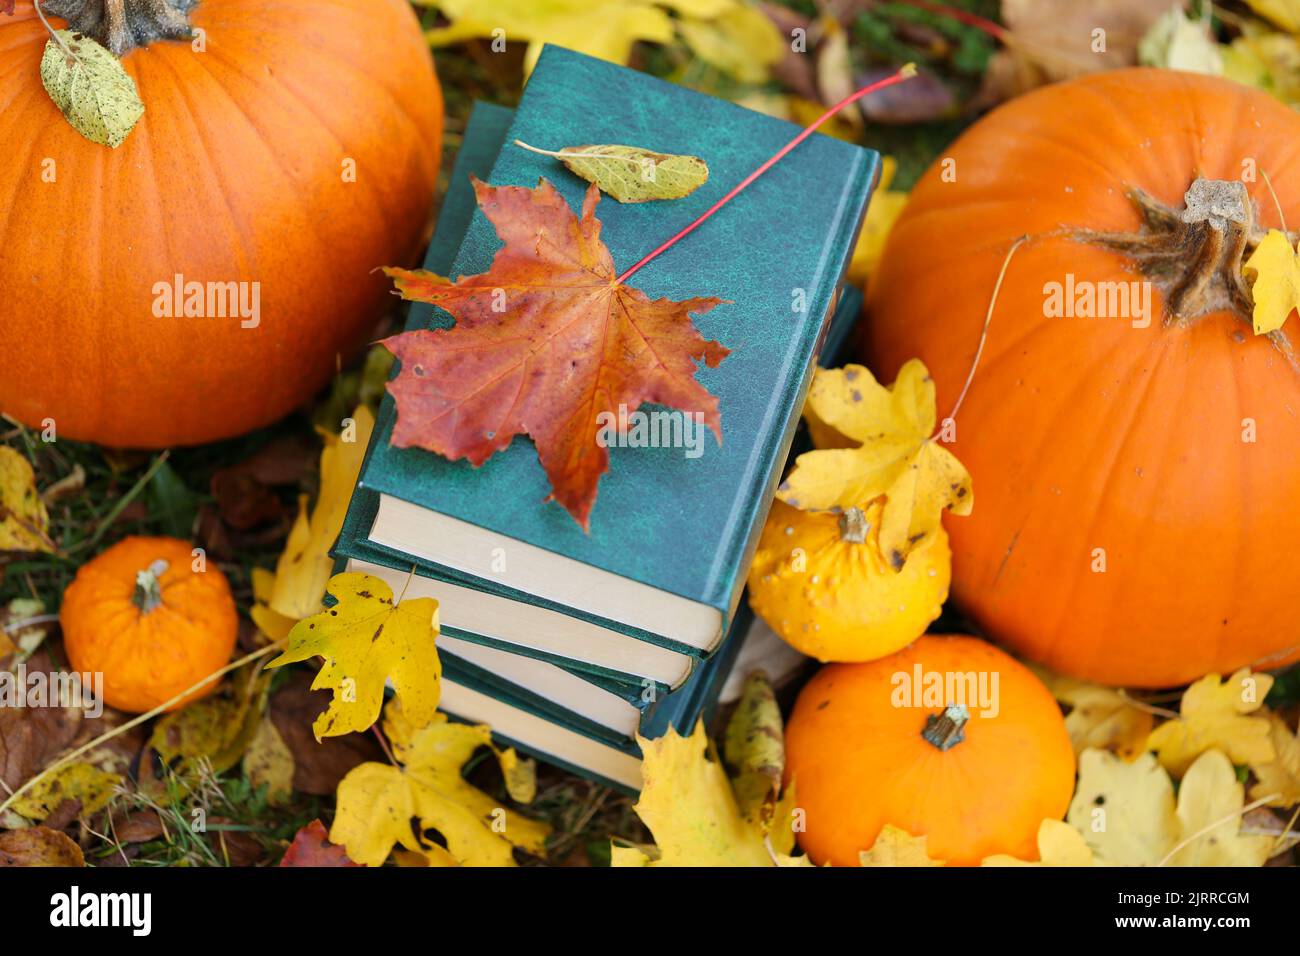 autum Books.Back to school.Halloween Books.Study and education. stack of books,maple leaves and pumpkins in autumn garden.Autumn cozy reading. school Stock Photo